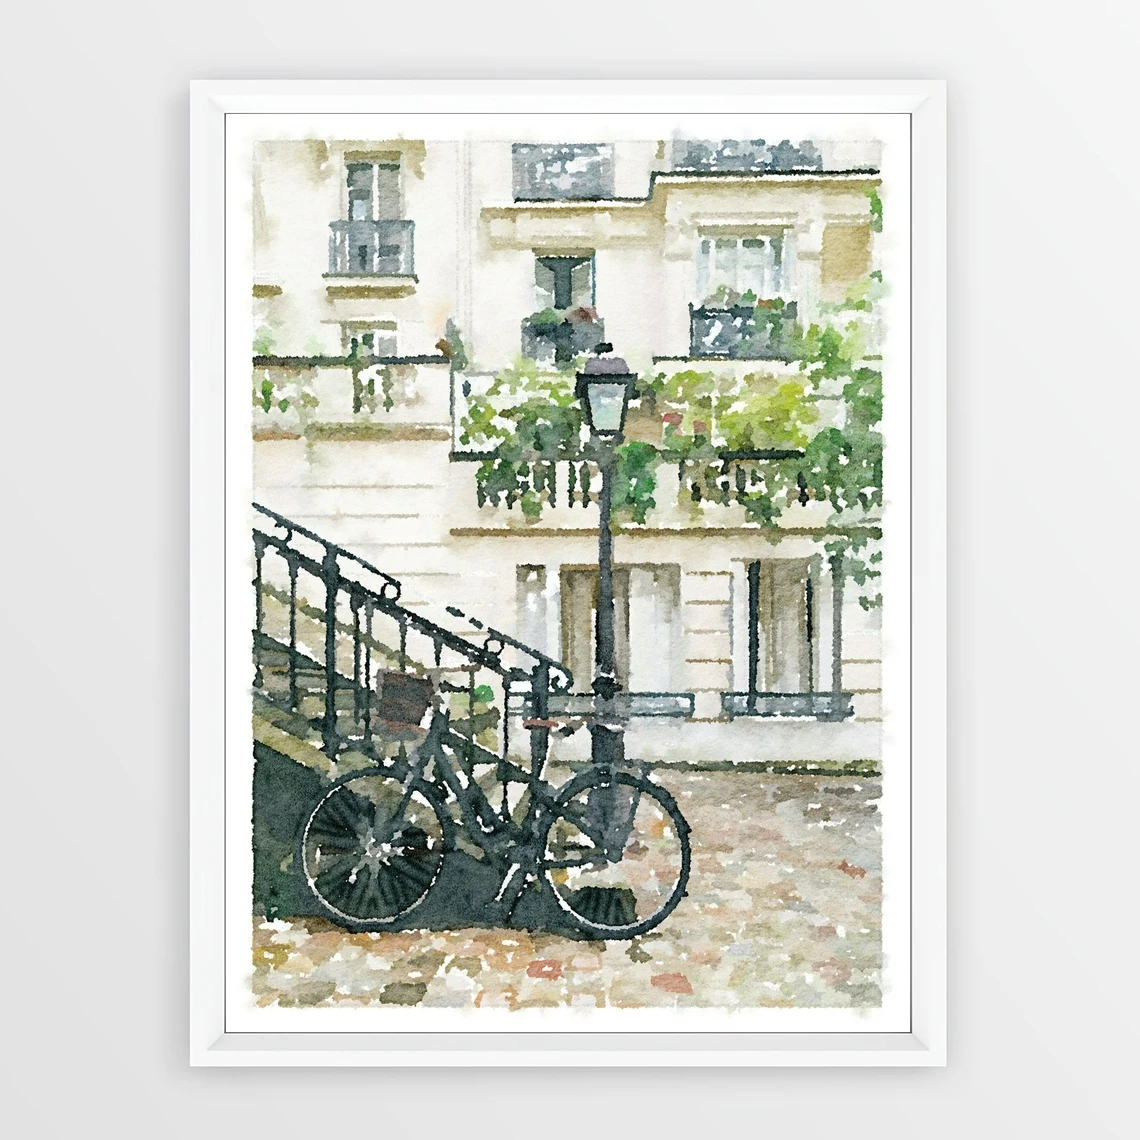 

Paris France Street Building Scene with Bicycle, Watercolor , Fine Art Paris Print Photography, French Wall Decor Art Poster